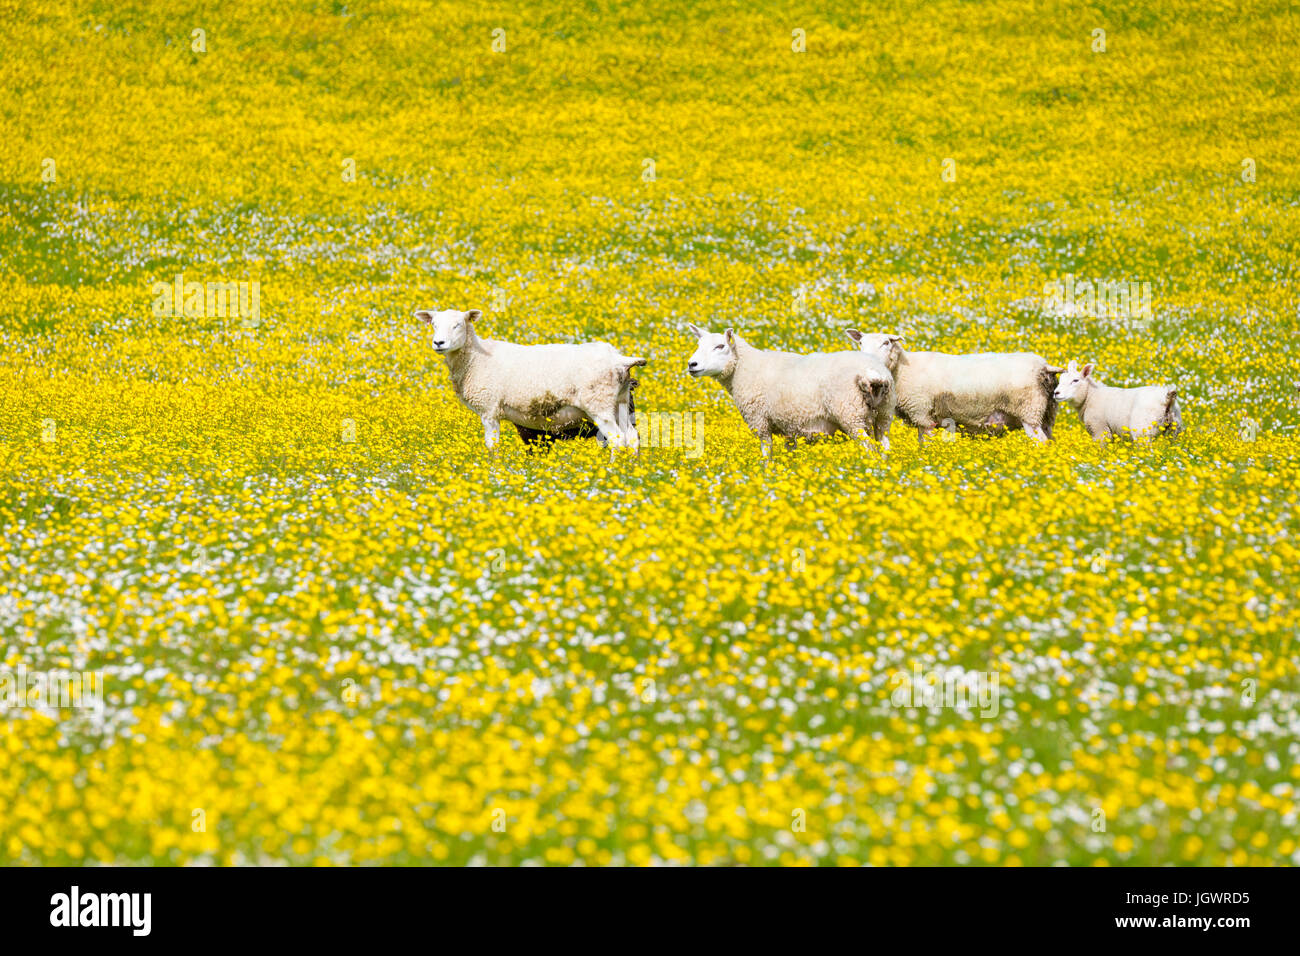 Sheep in a field of yellow flowers, Orkney, Scotland UK Stock Photo